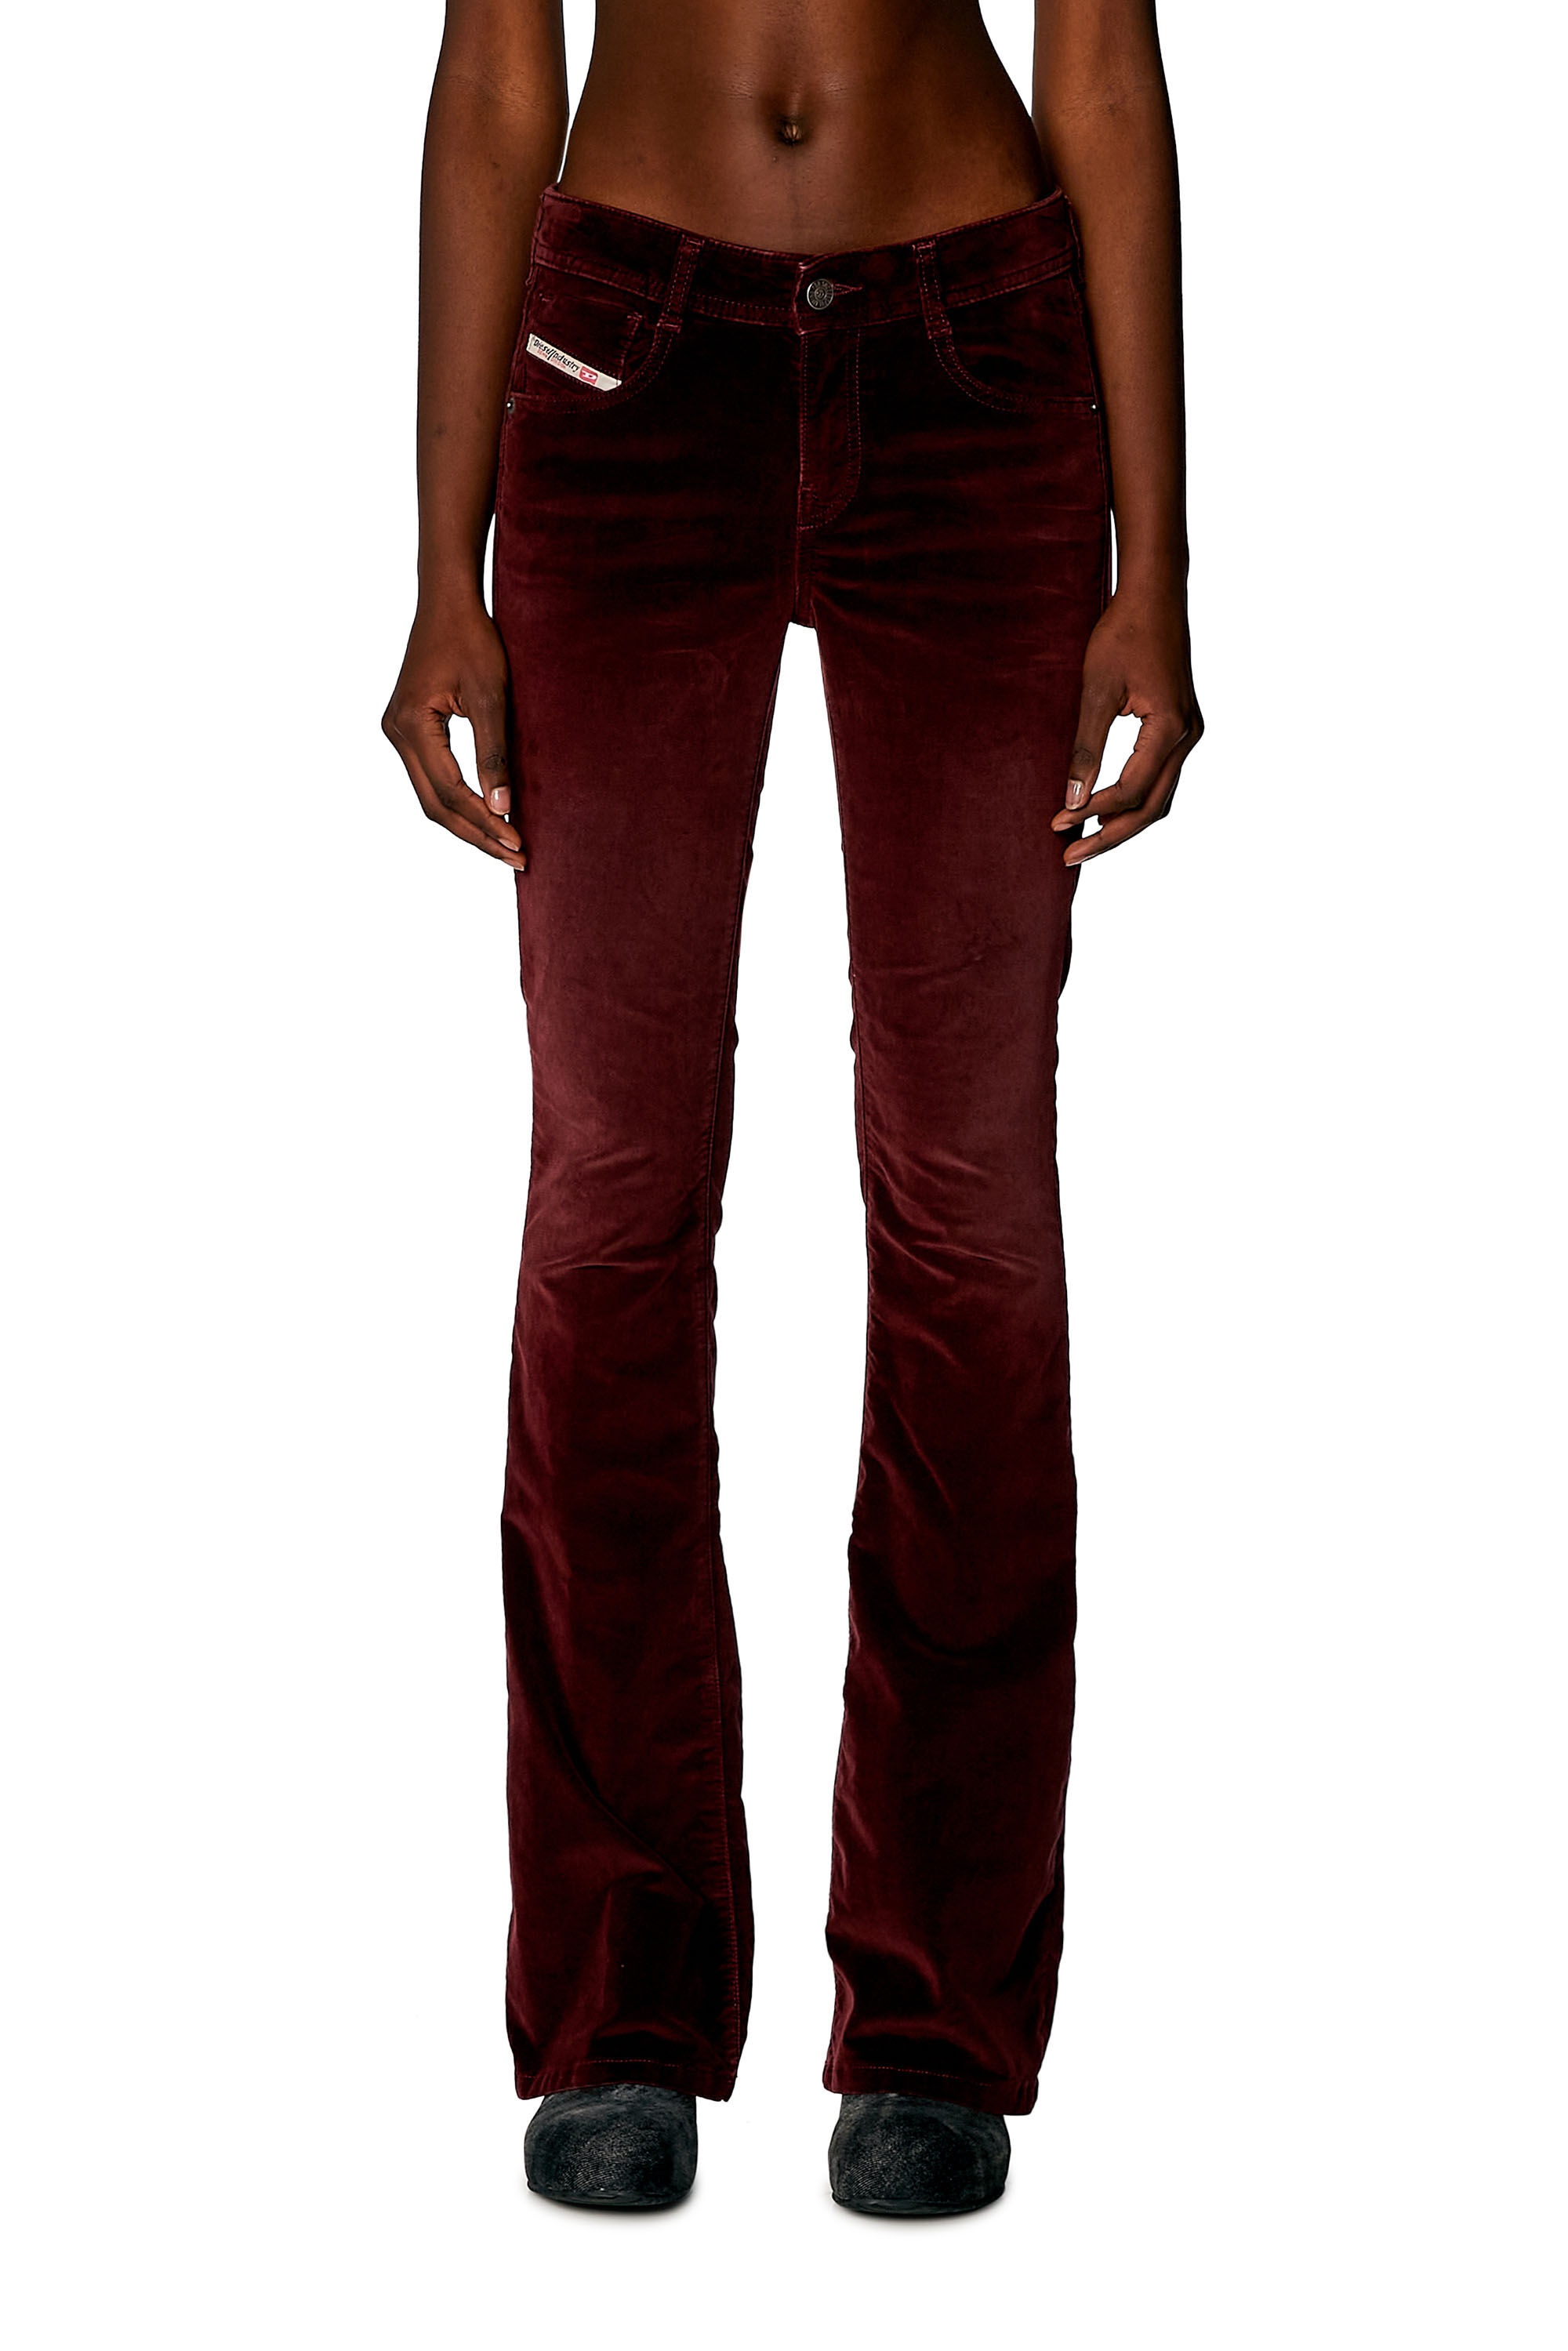 BOOTCUT AND FLARE JEANS 1969 D-EBBEY 003HL - 3